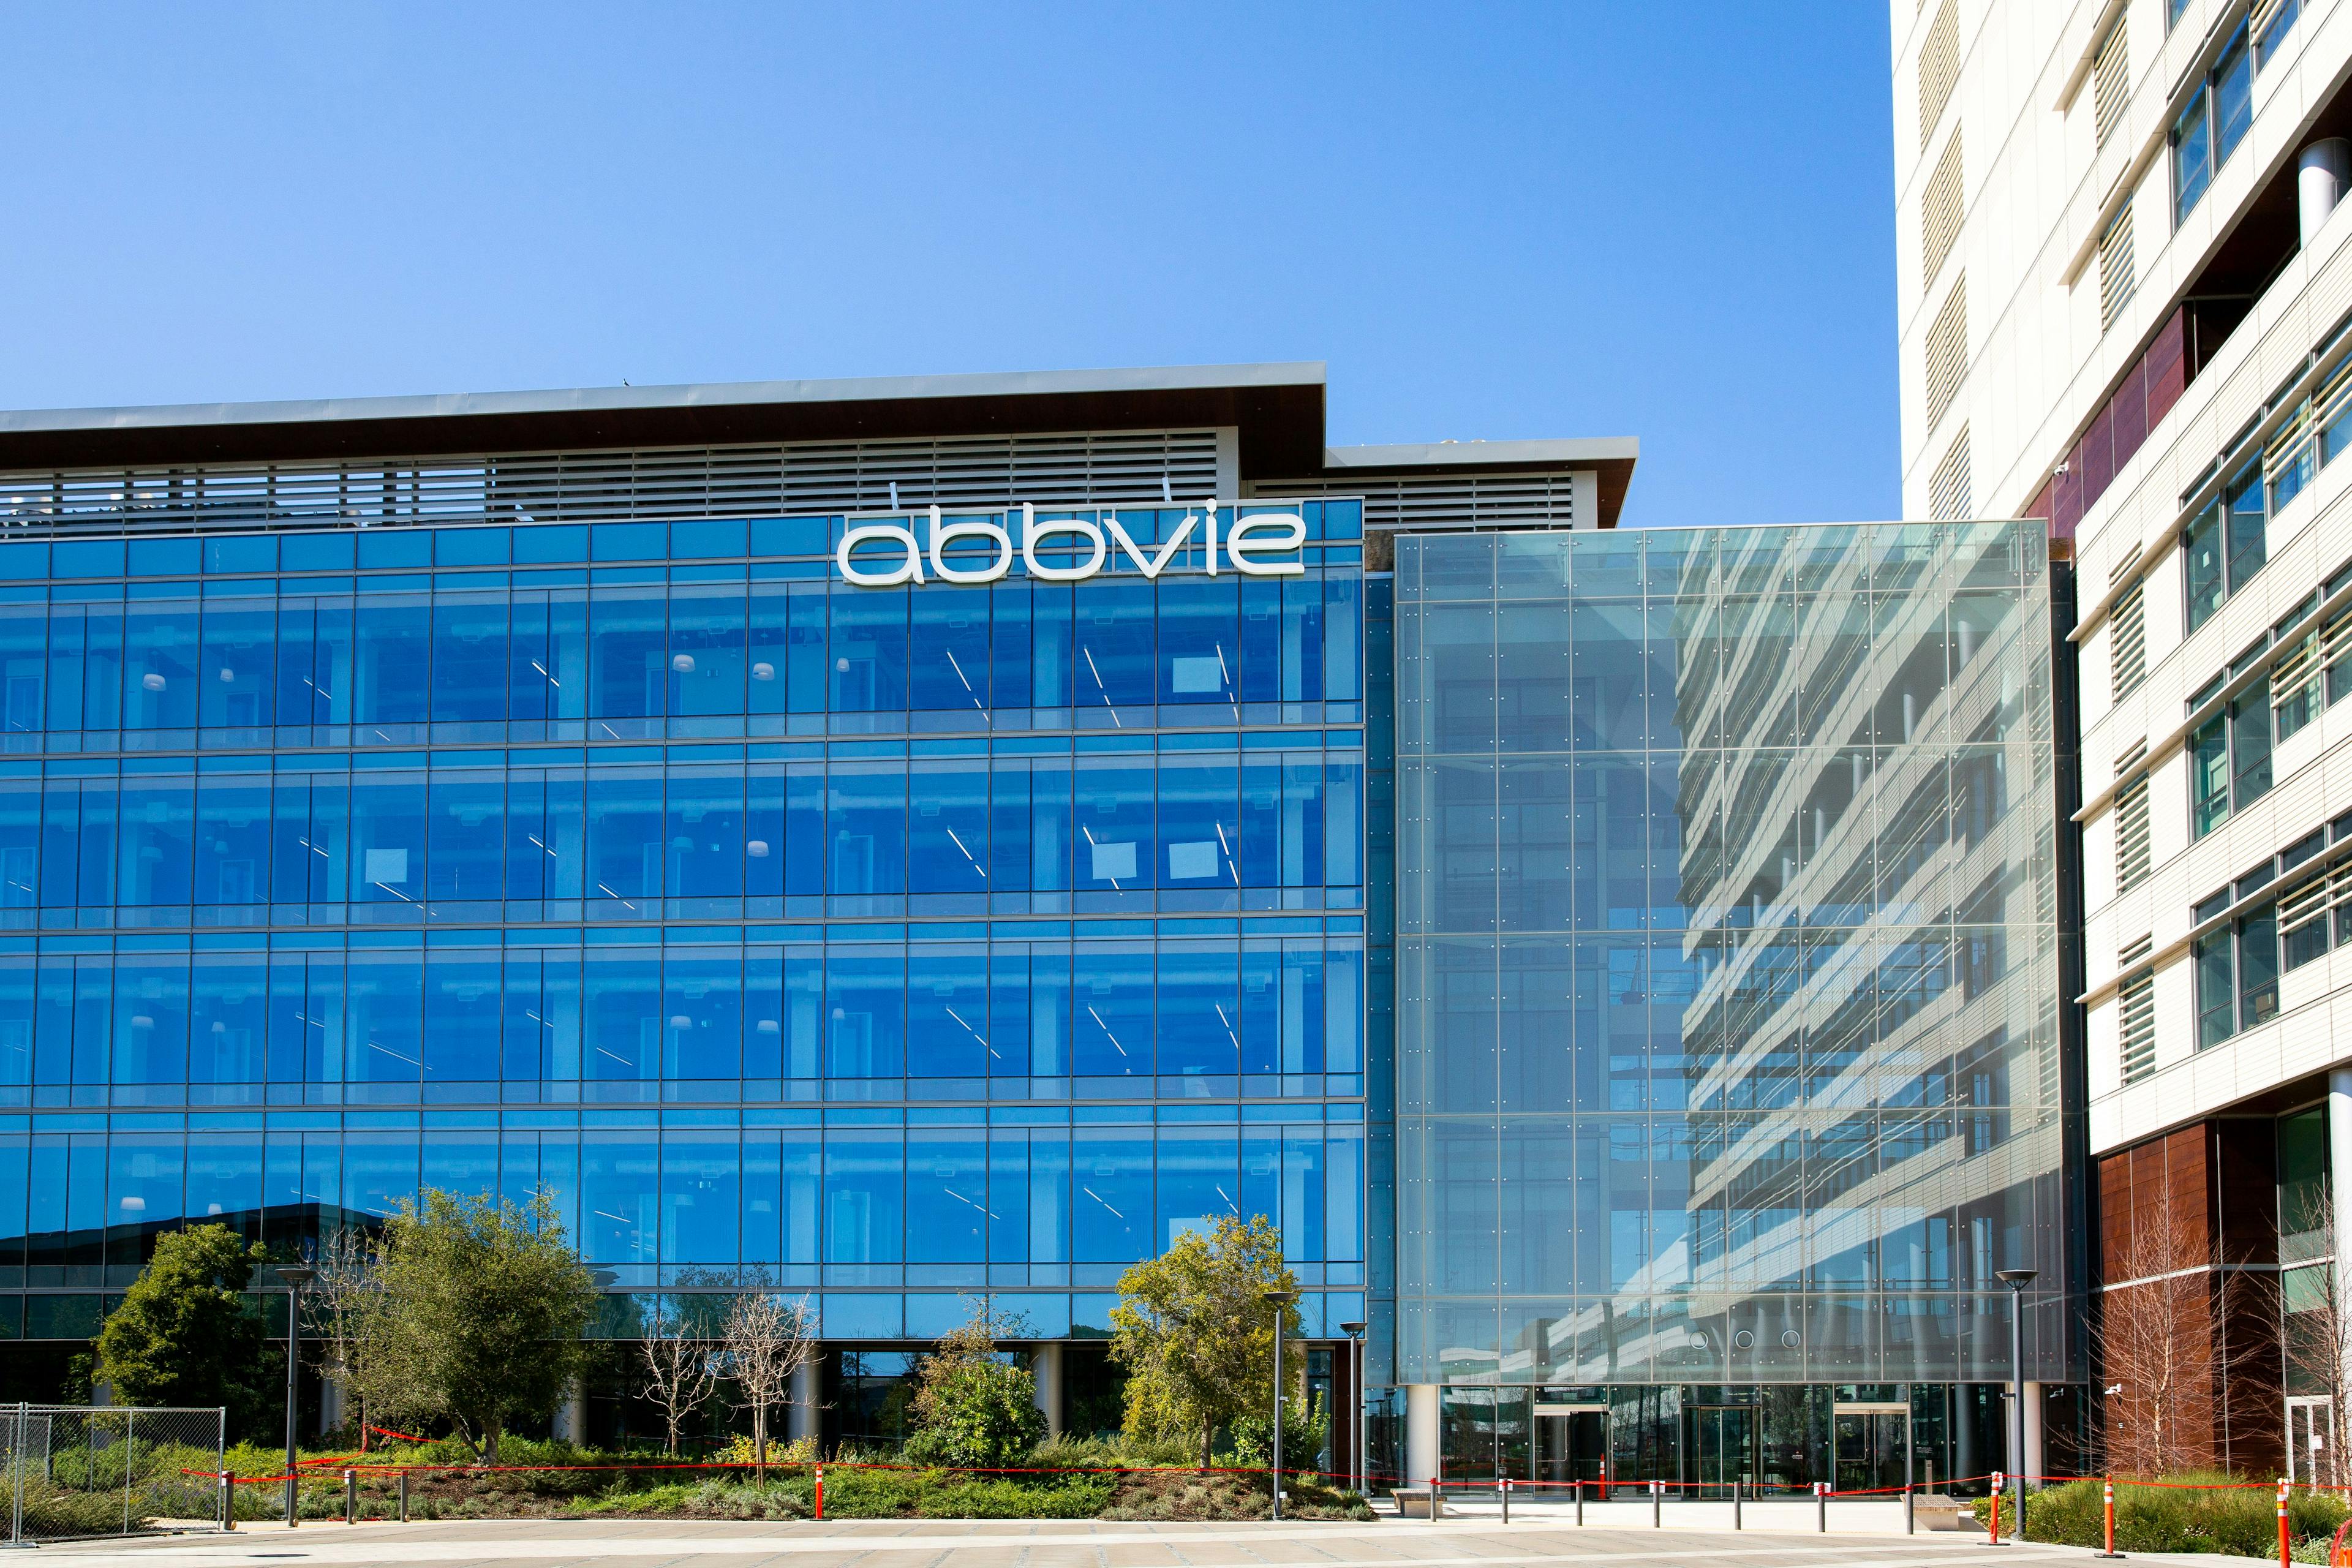 A glass building with AbbVie's name on it.